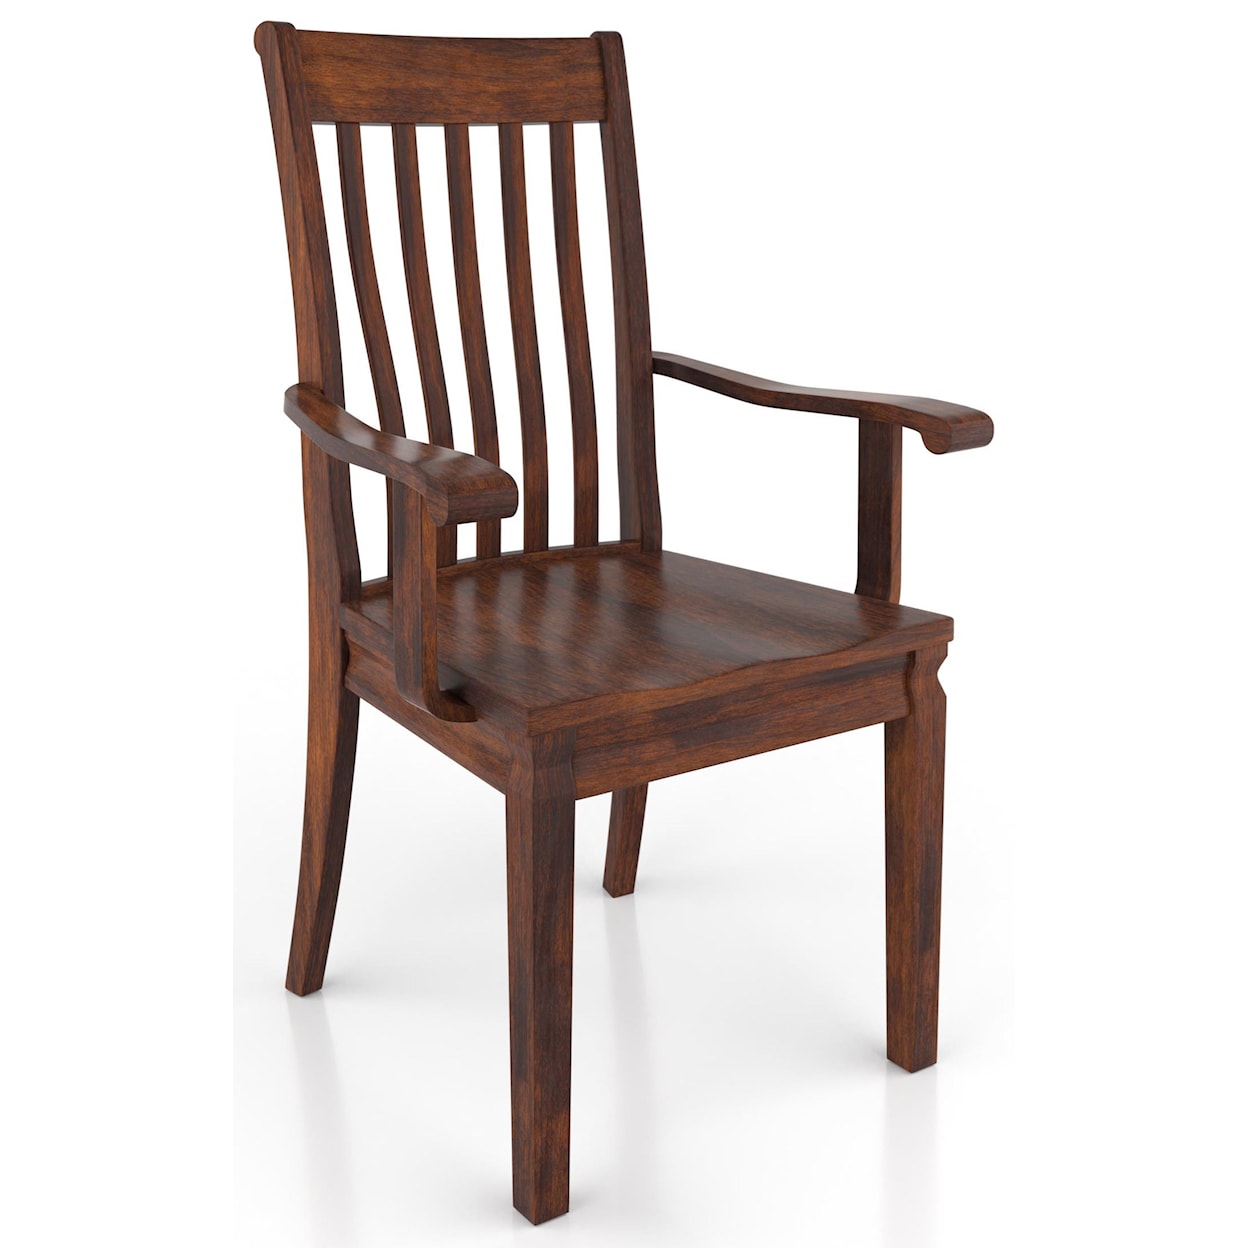 Country Comfort Woodworking Bennex Arm Chair